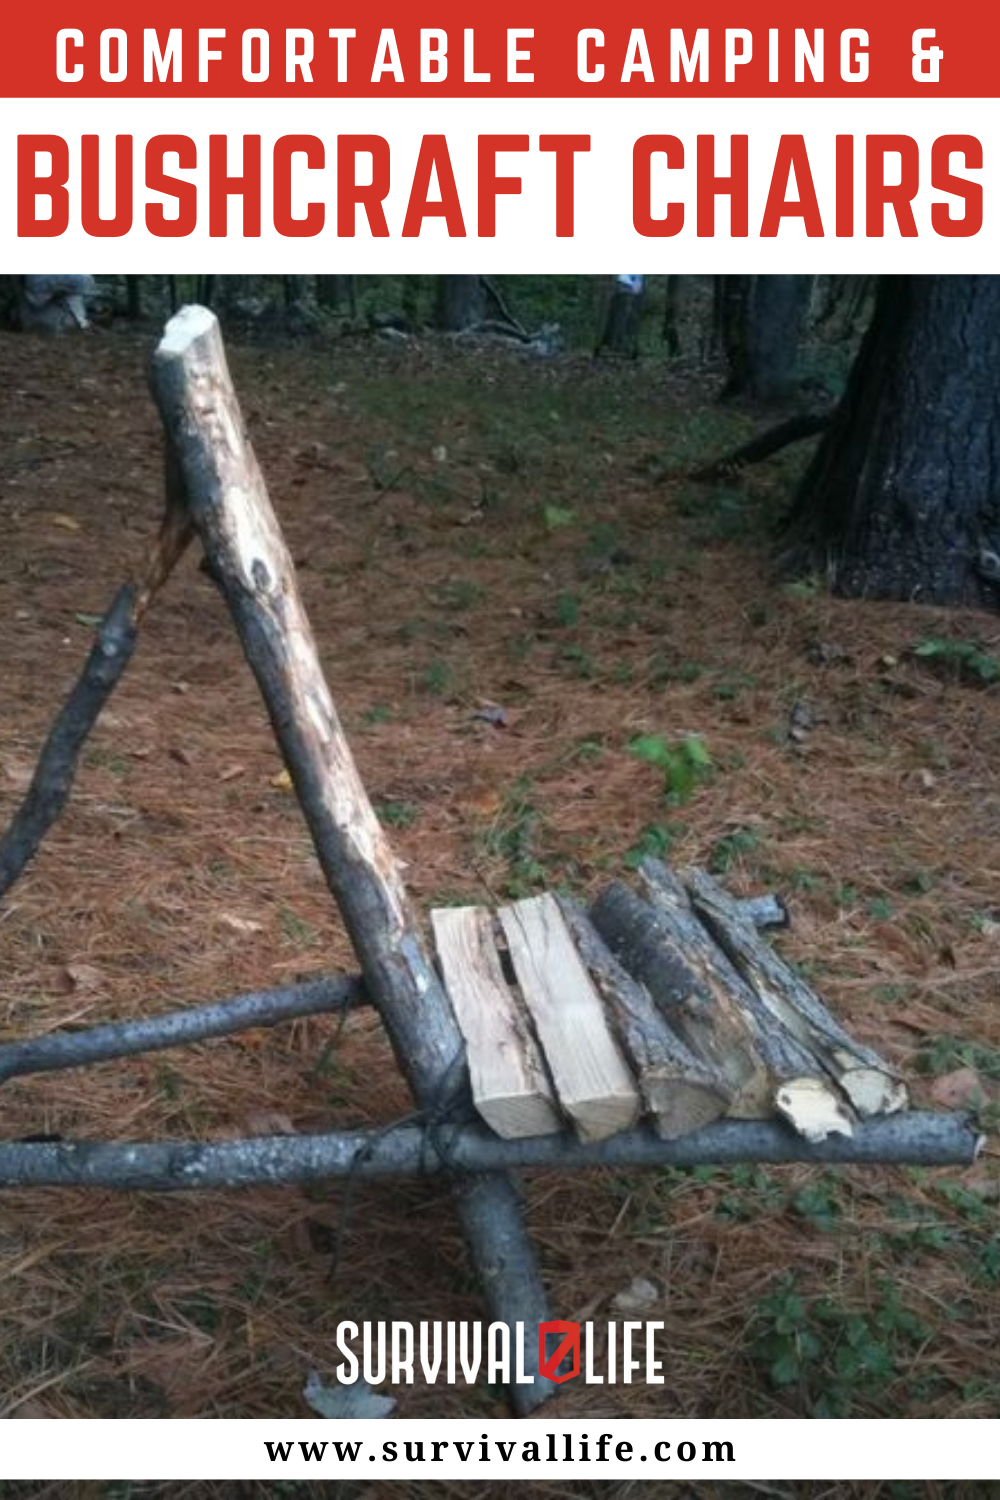 Bushcraft Chairs for Comfortable Camping